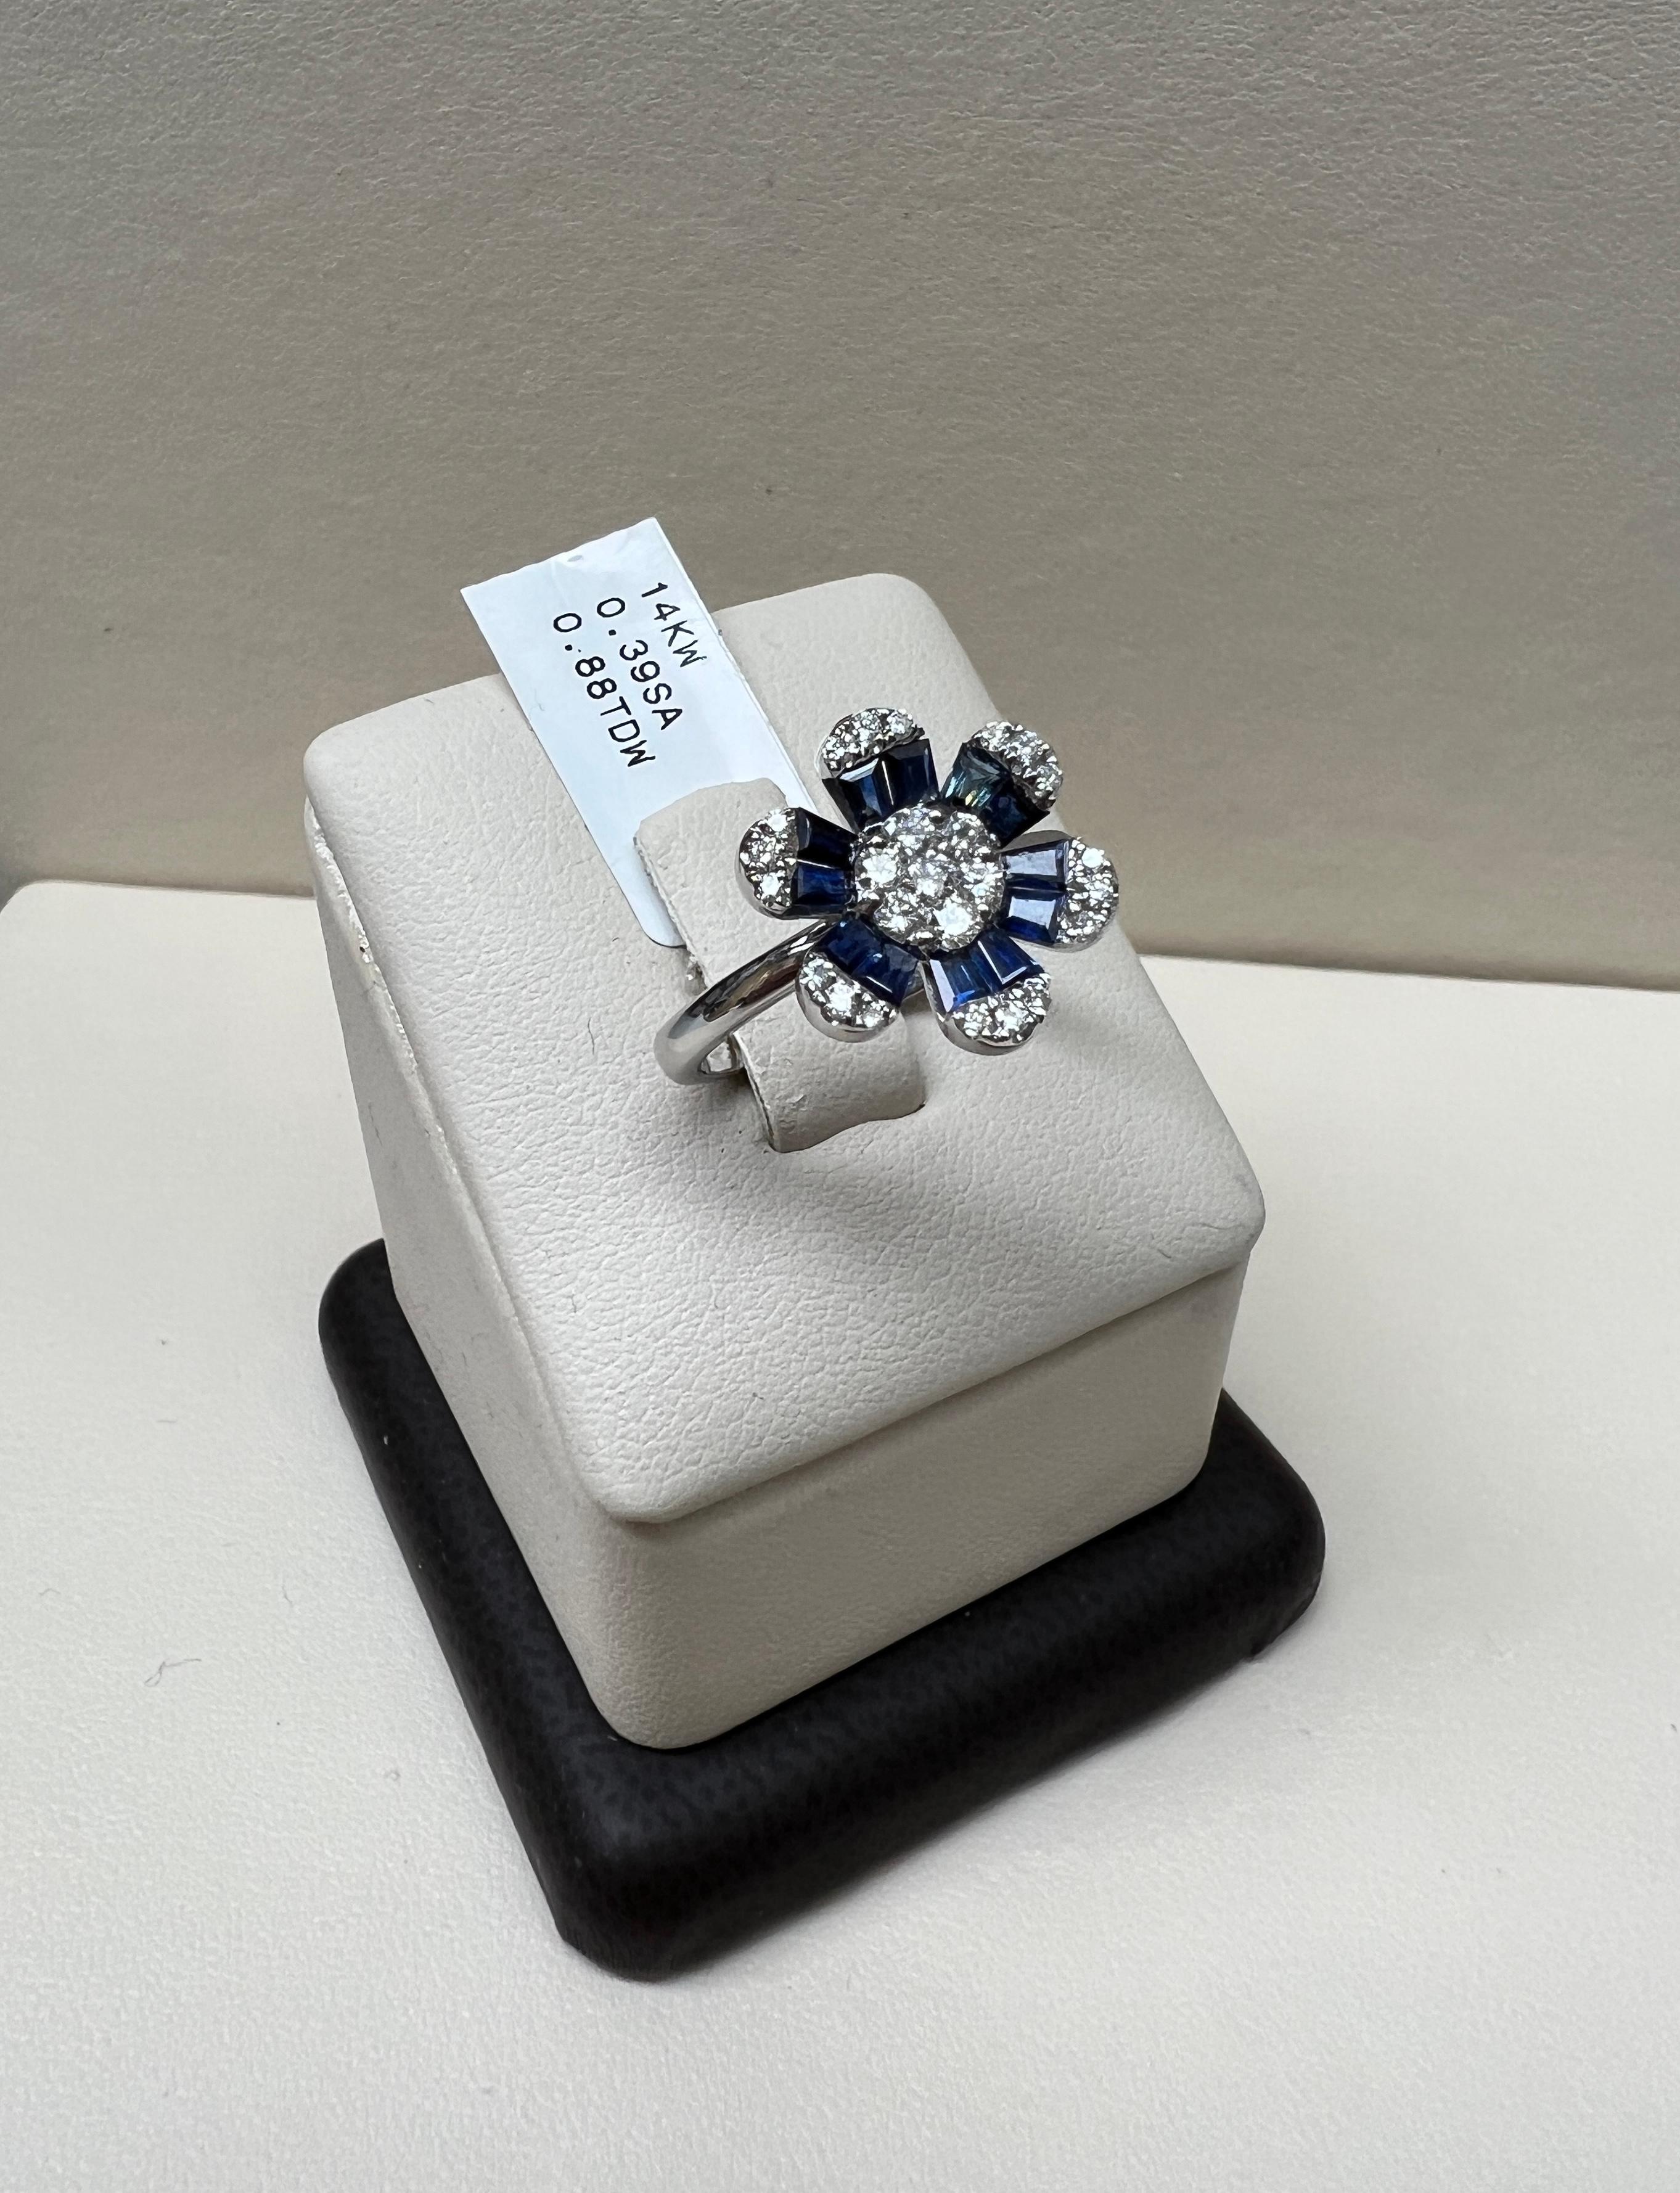 Solid 14K White Gold

Natural Round White Diamonds .88 Total Diamond Weight

G-H Color SI Clarity 

Natural Blue Sapphire Baguettes .39 Total Carat Weight

Size 6.5 - Sizable 

Free Insured Shipping